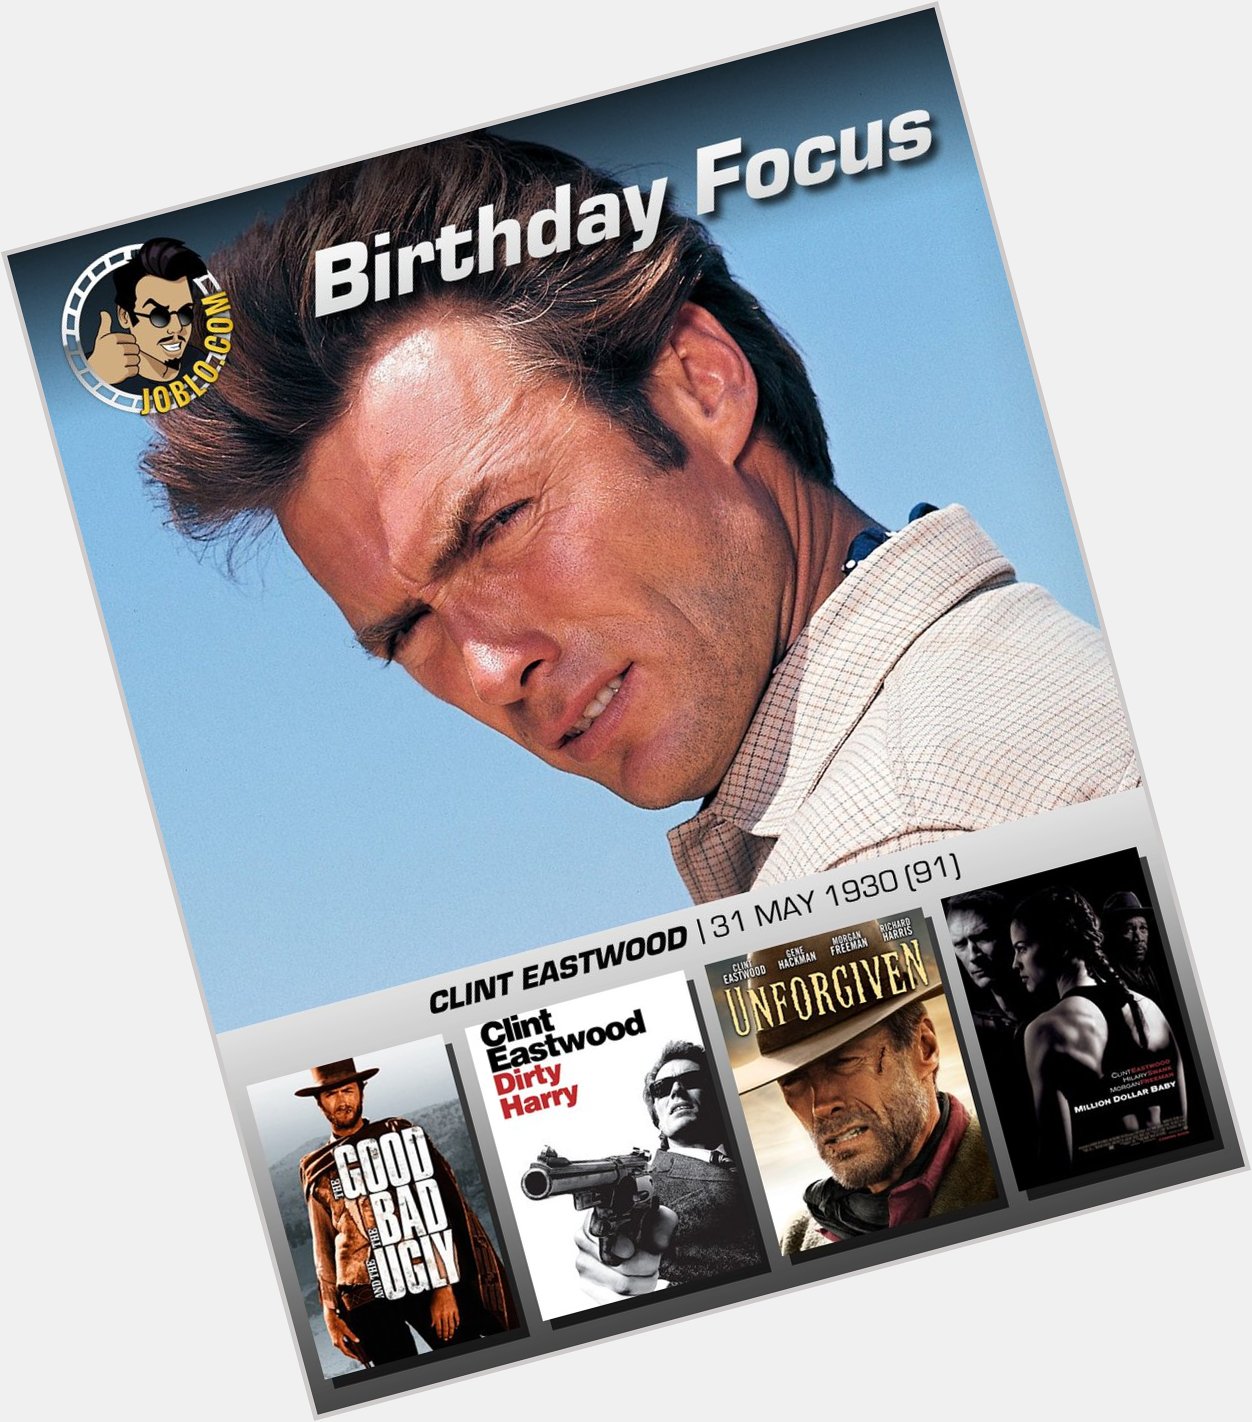 Wishing a very happy 91st birthday to the incredible Clint Eastwood! 